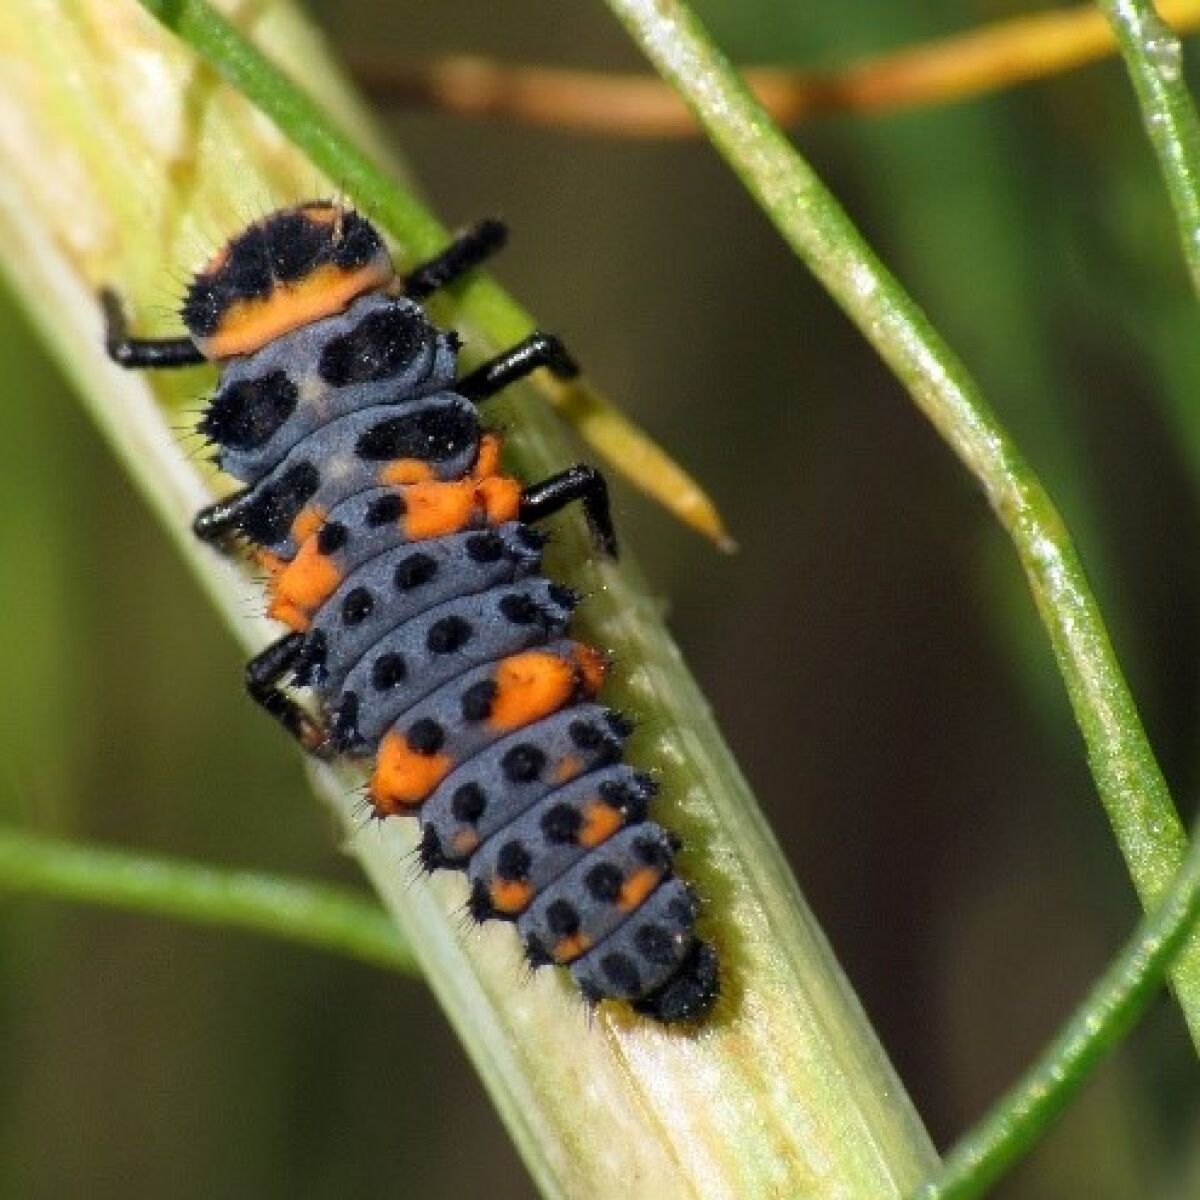 Garden Mastery: Here's how to identify and manage insect pests in your  garden - The San Diego Union-Tribune